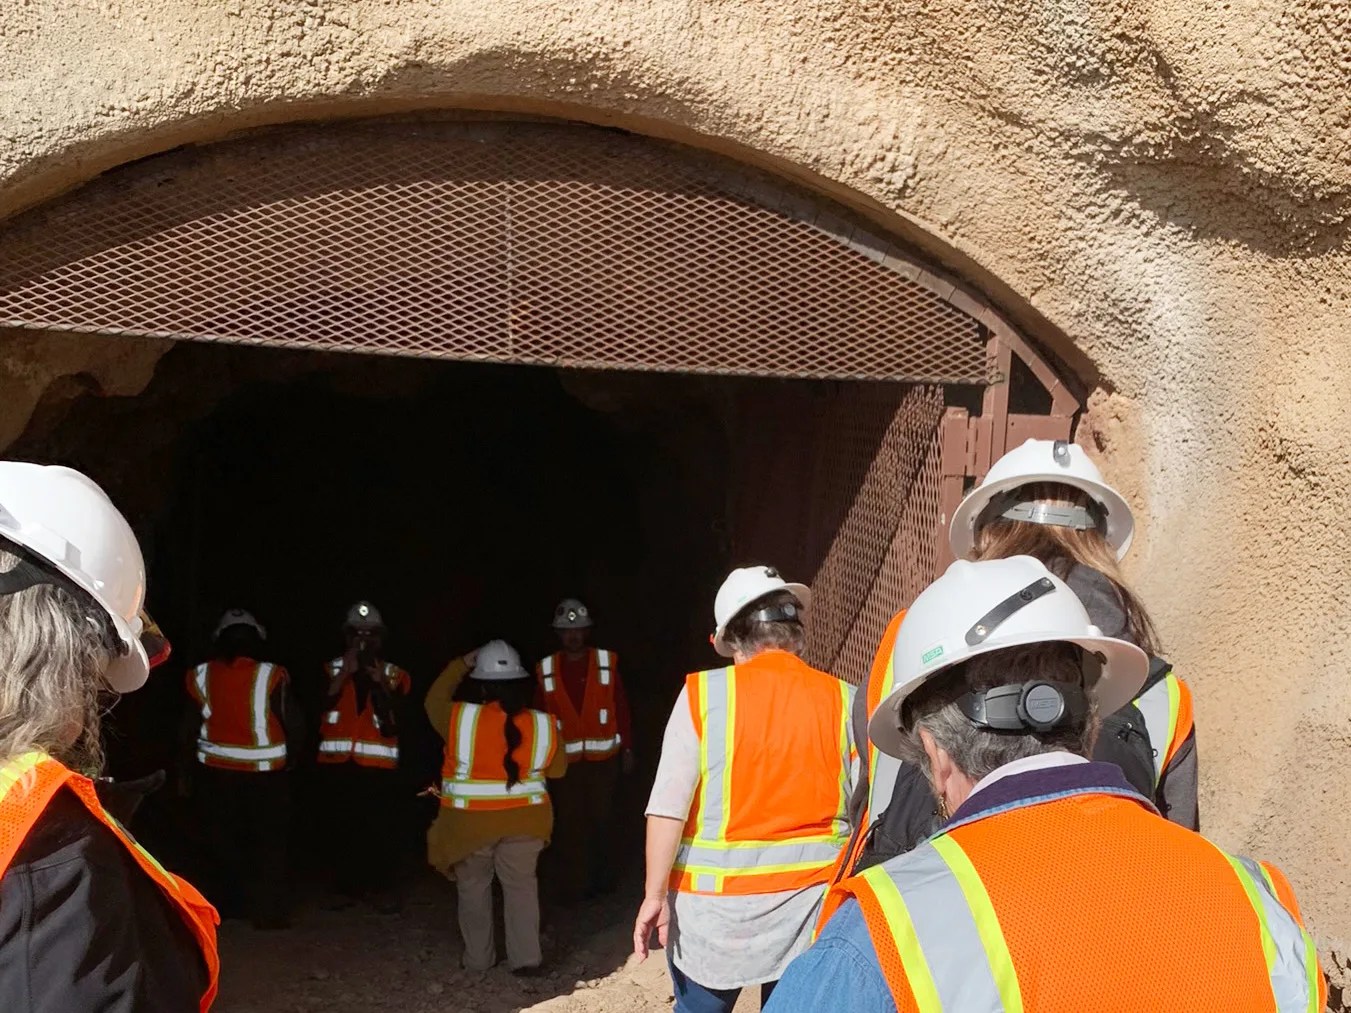 A small group of people wearing safety gear walk into a mine shaft.